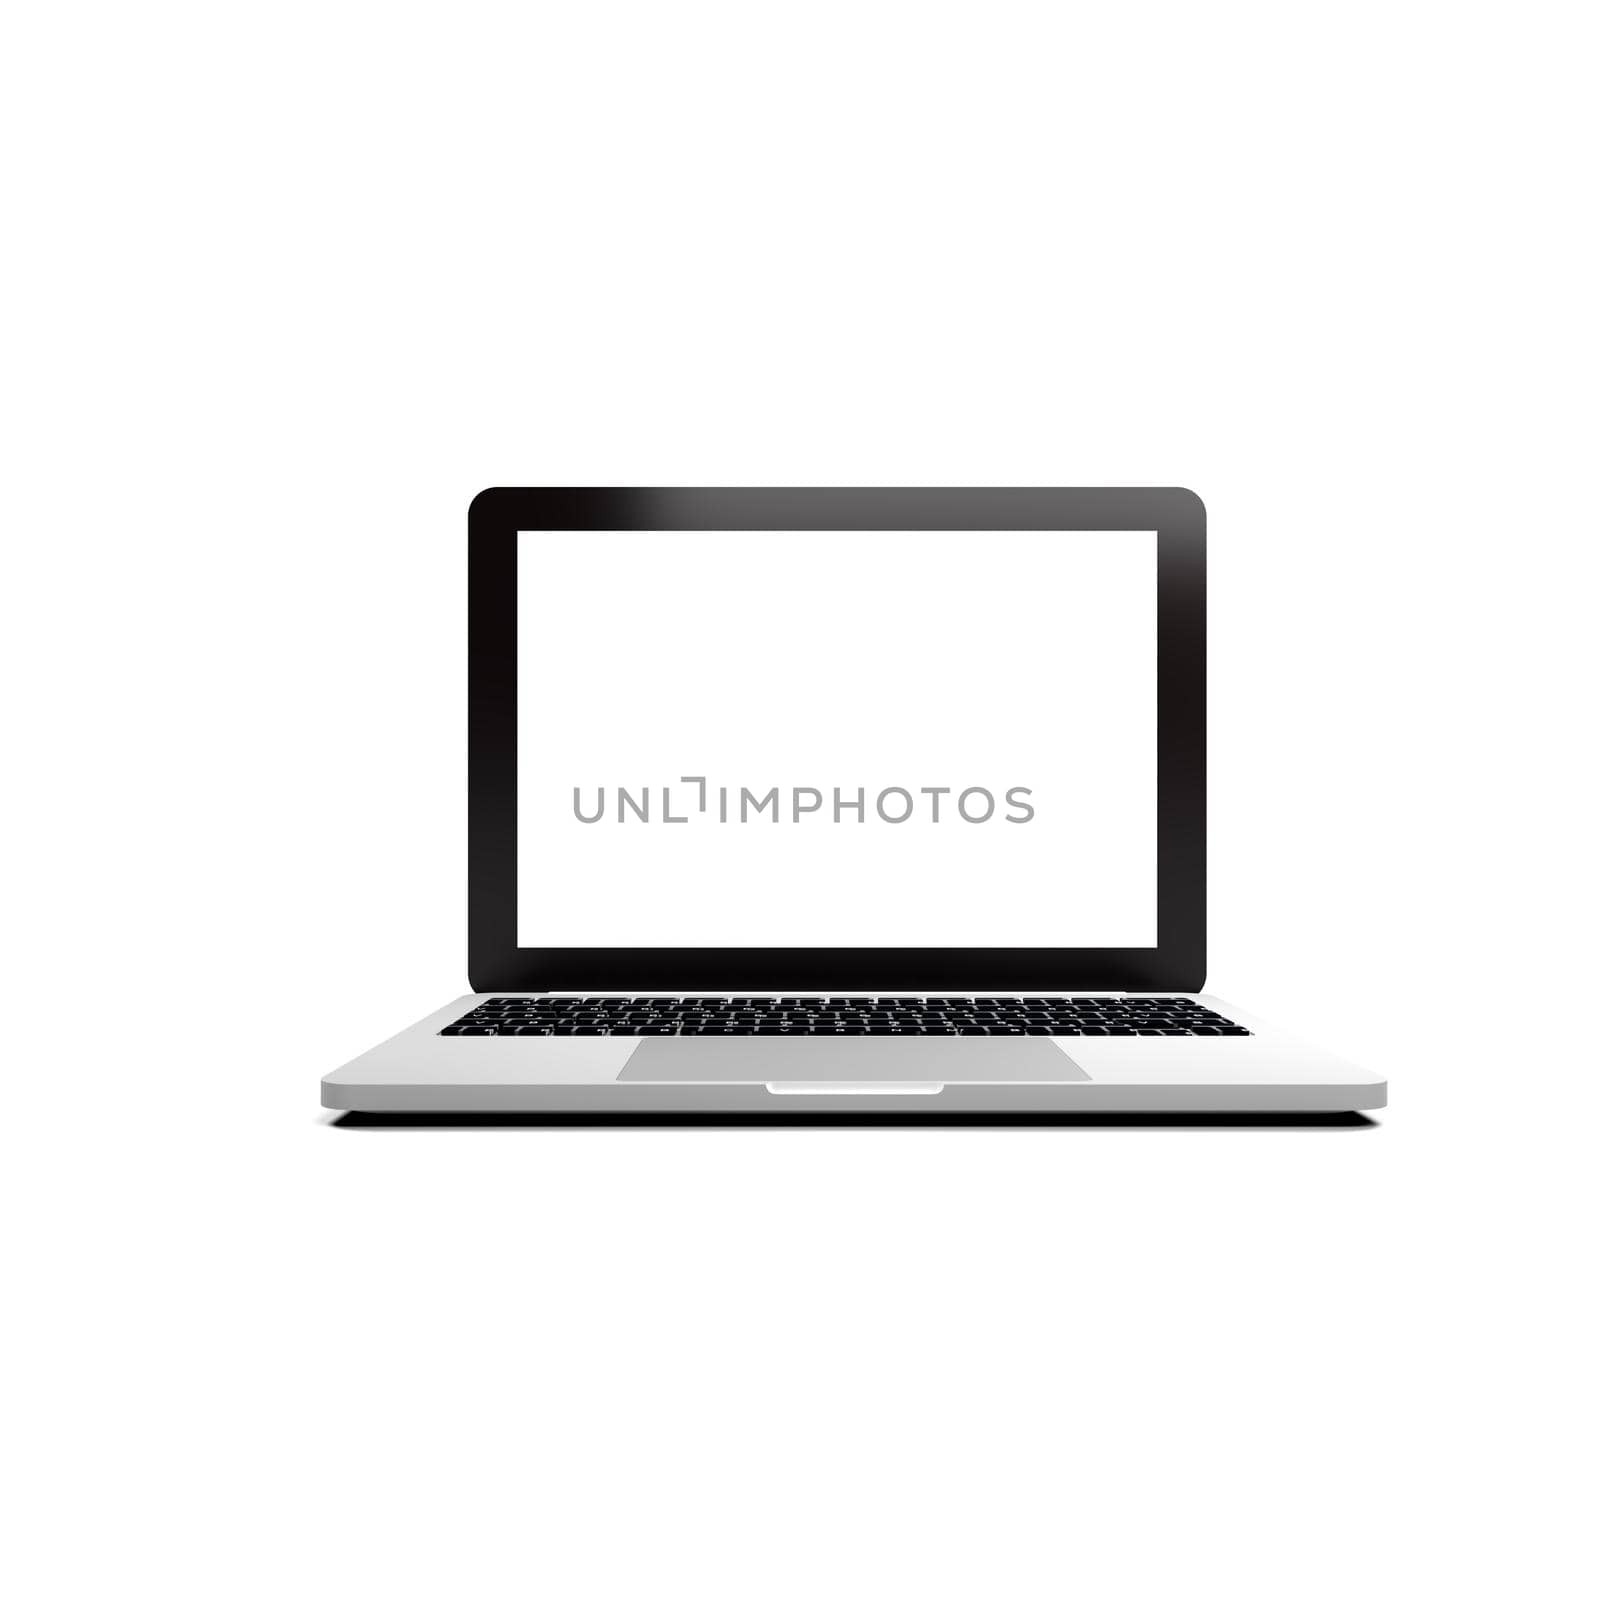 Isolated laptop with empty space on white background. 3d illustration